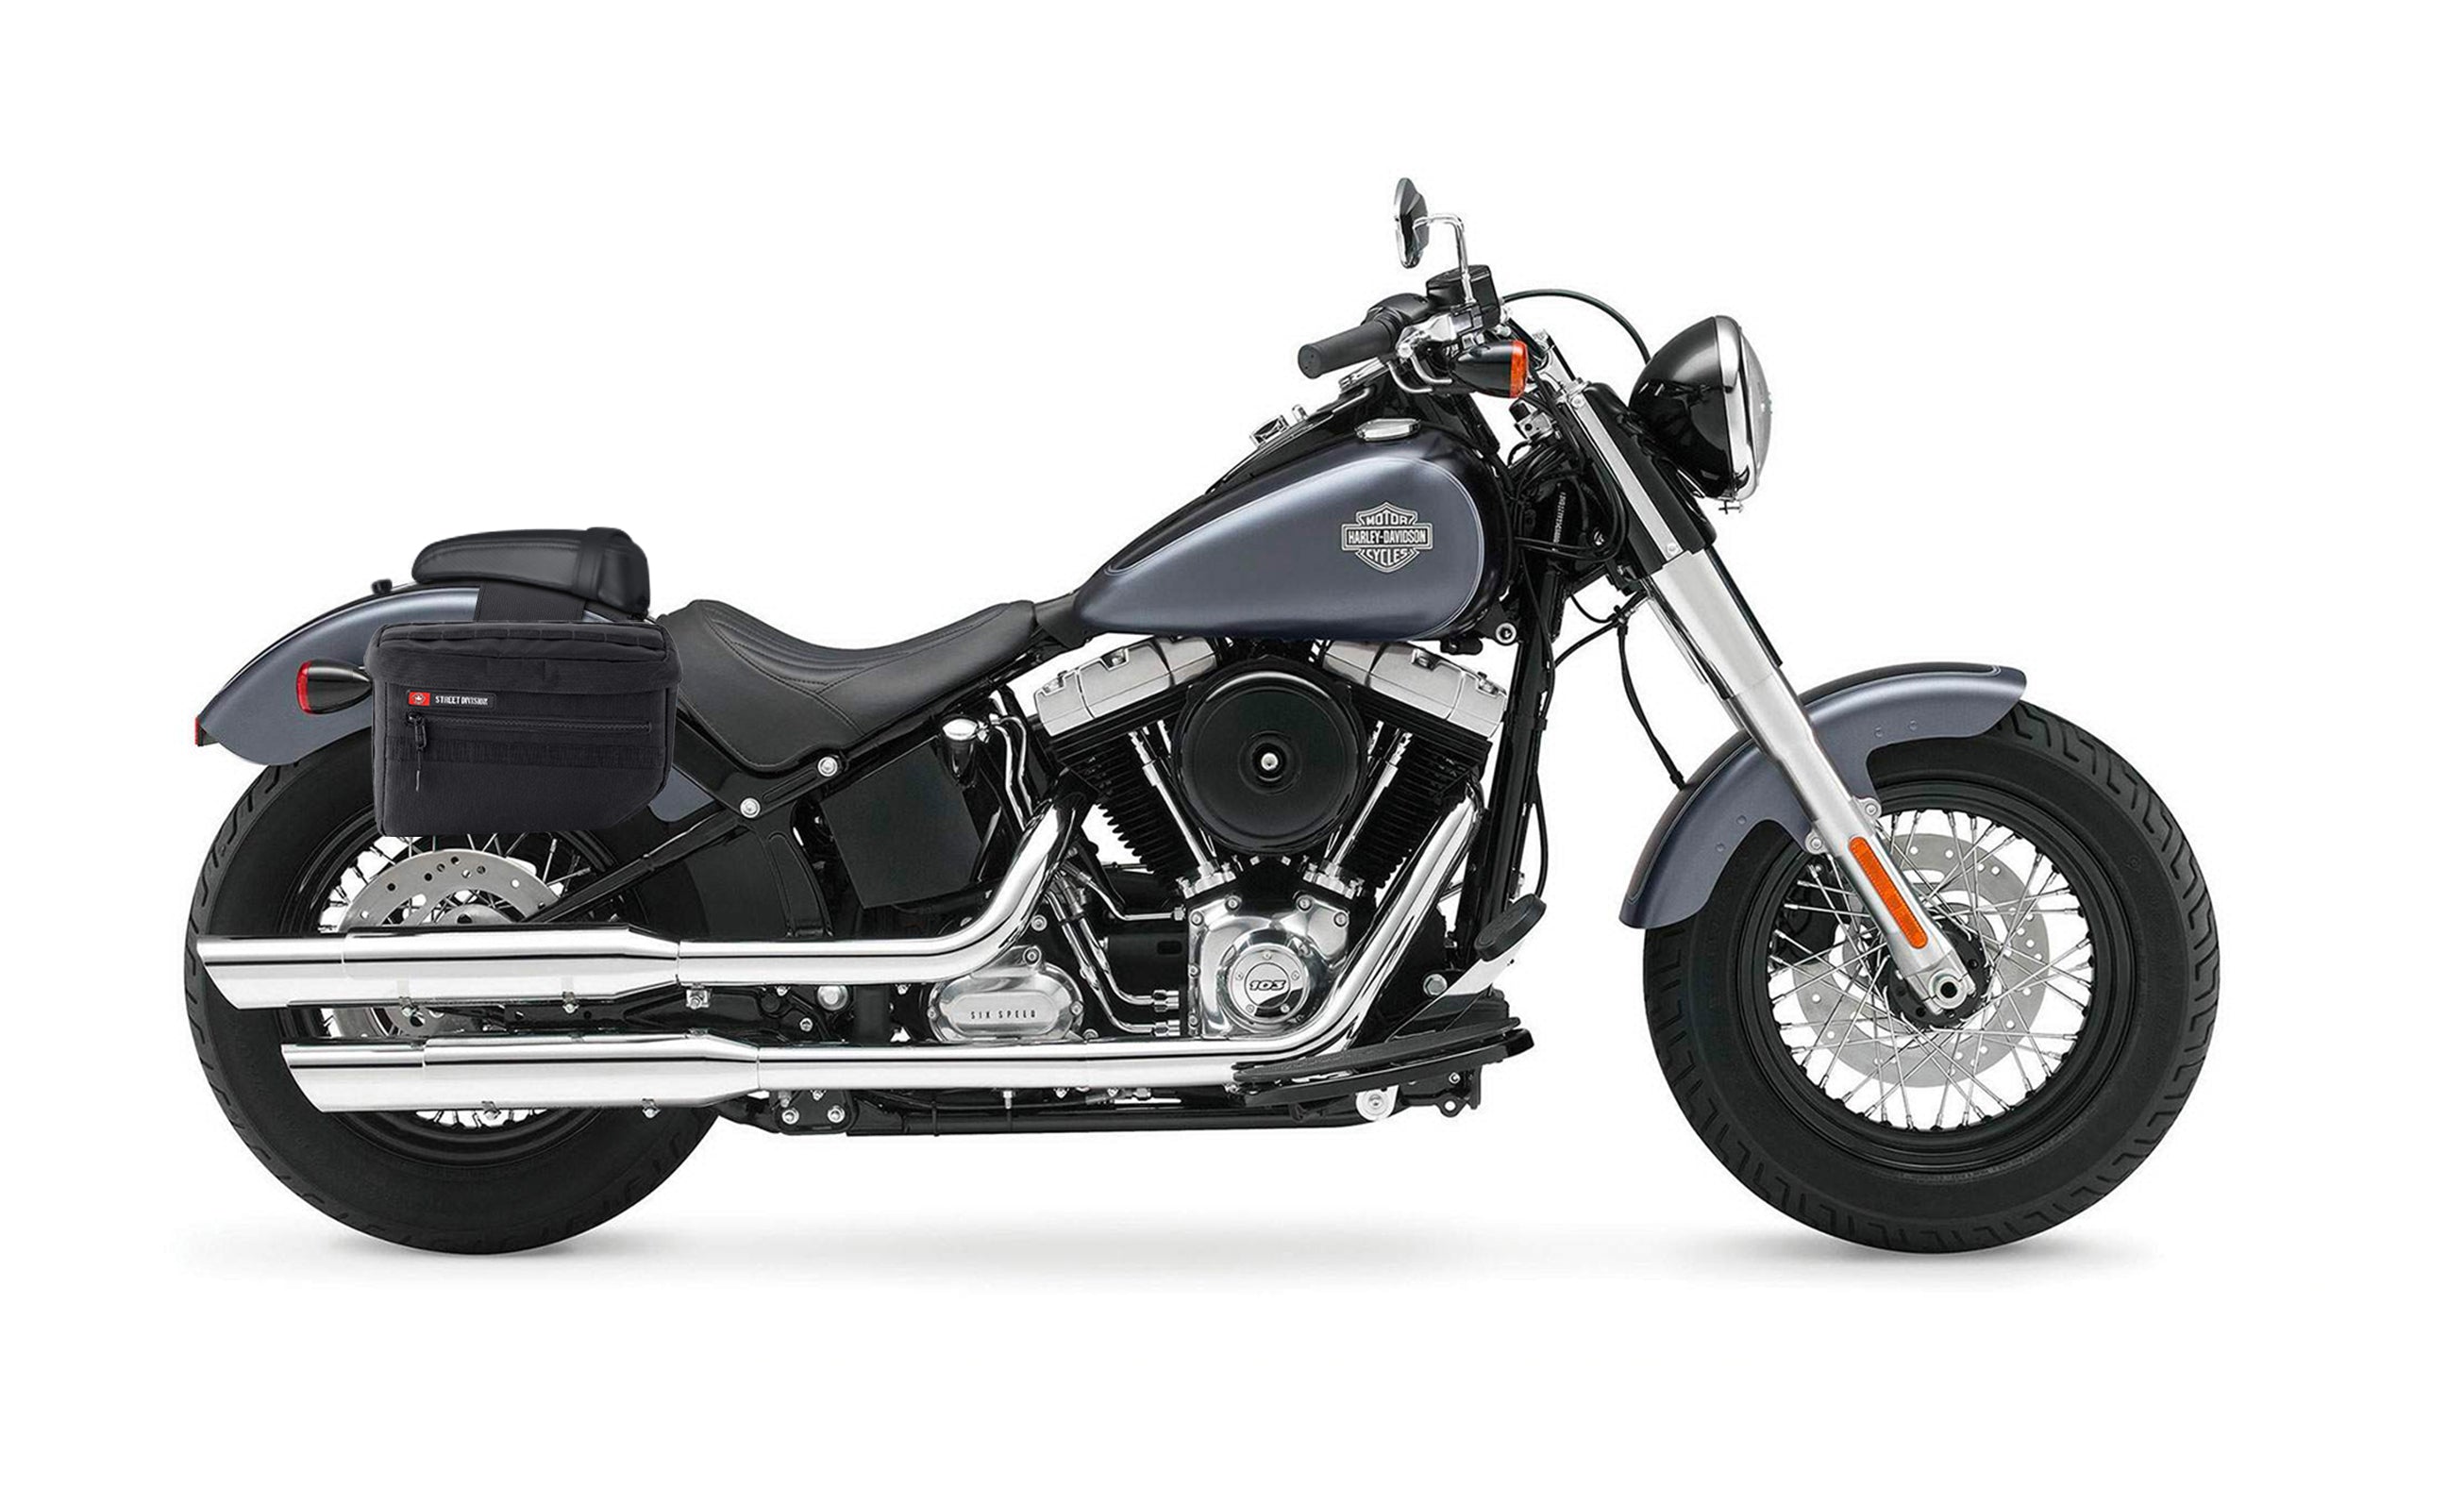 27L - Patriot Large Motorcycle Throw Over Saddlebags for Harley Softail Slim FLS on Bike Photo @expand